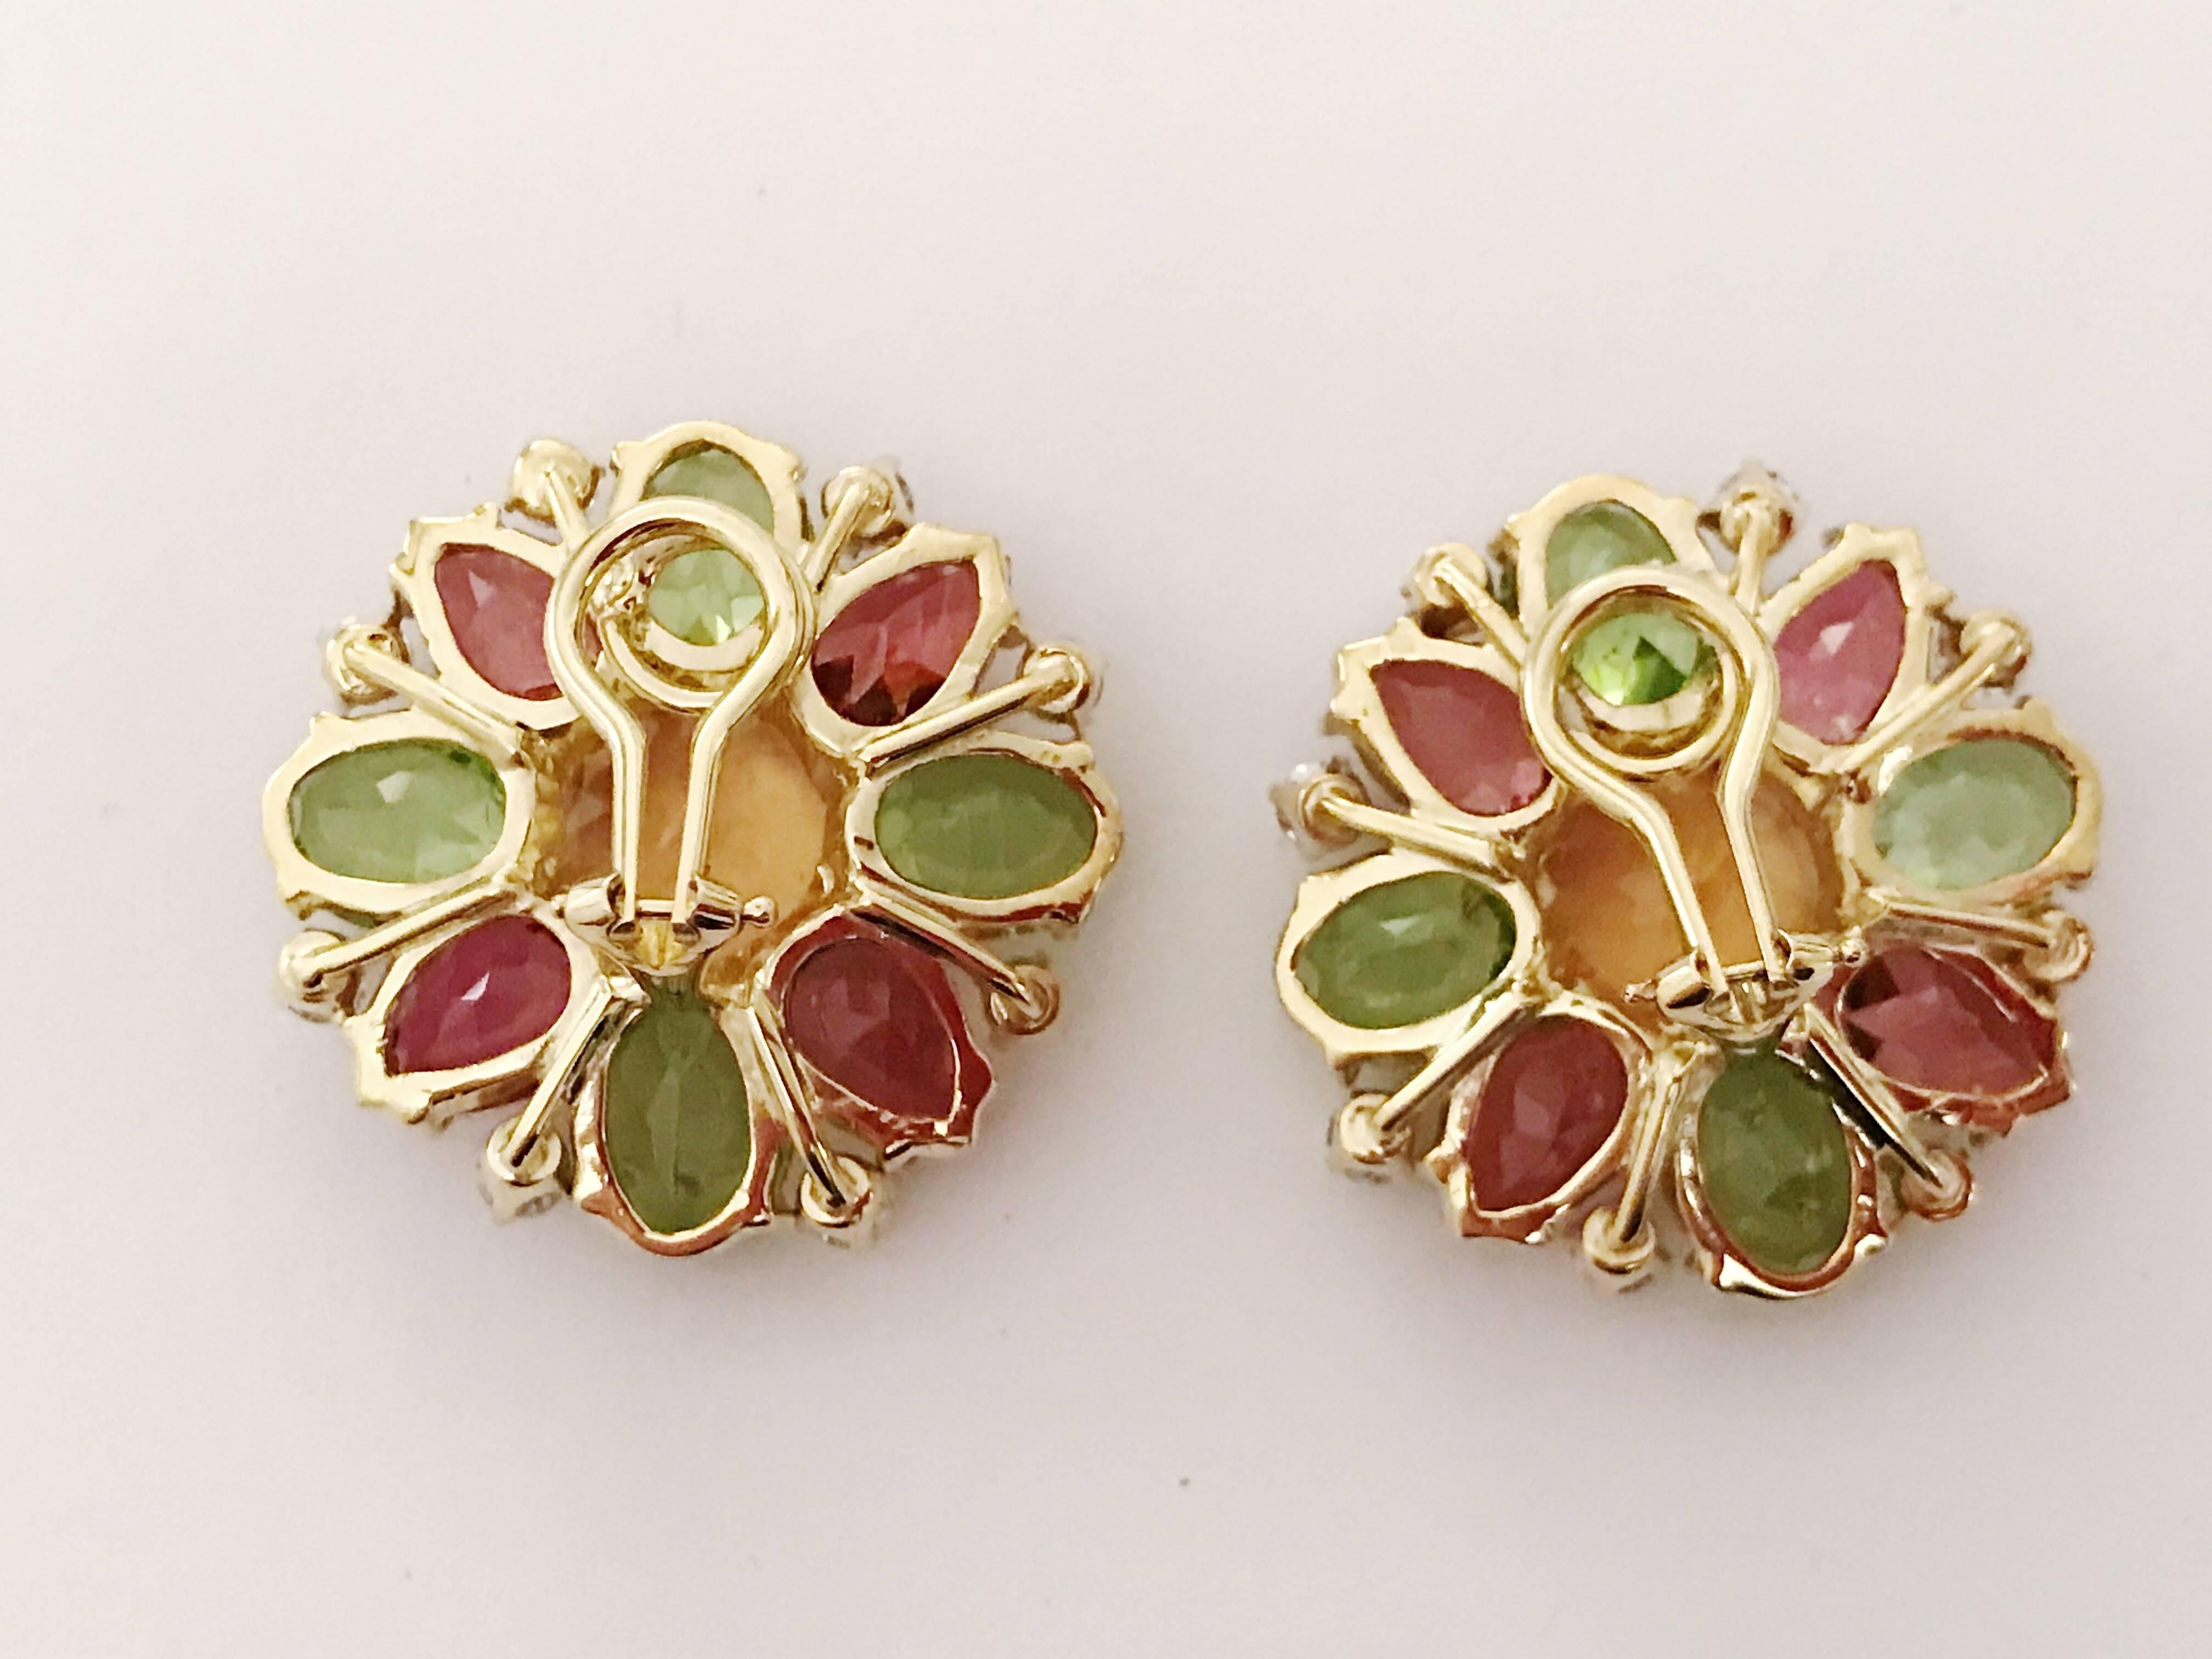 18kt Yellow Gold Flower shaped earring is a classic statement earring. The center Citrine stone is complemented with Peridot, Rubellite, and Diamonds surrounding it. The stud measure 1 inch in diameter. 

These earrings are clip-on, but posts can be